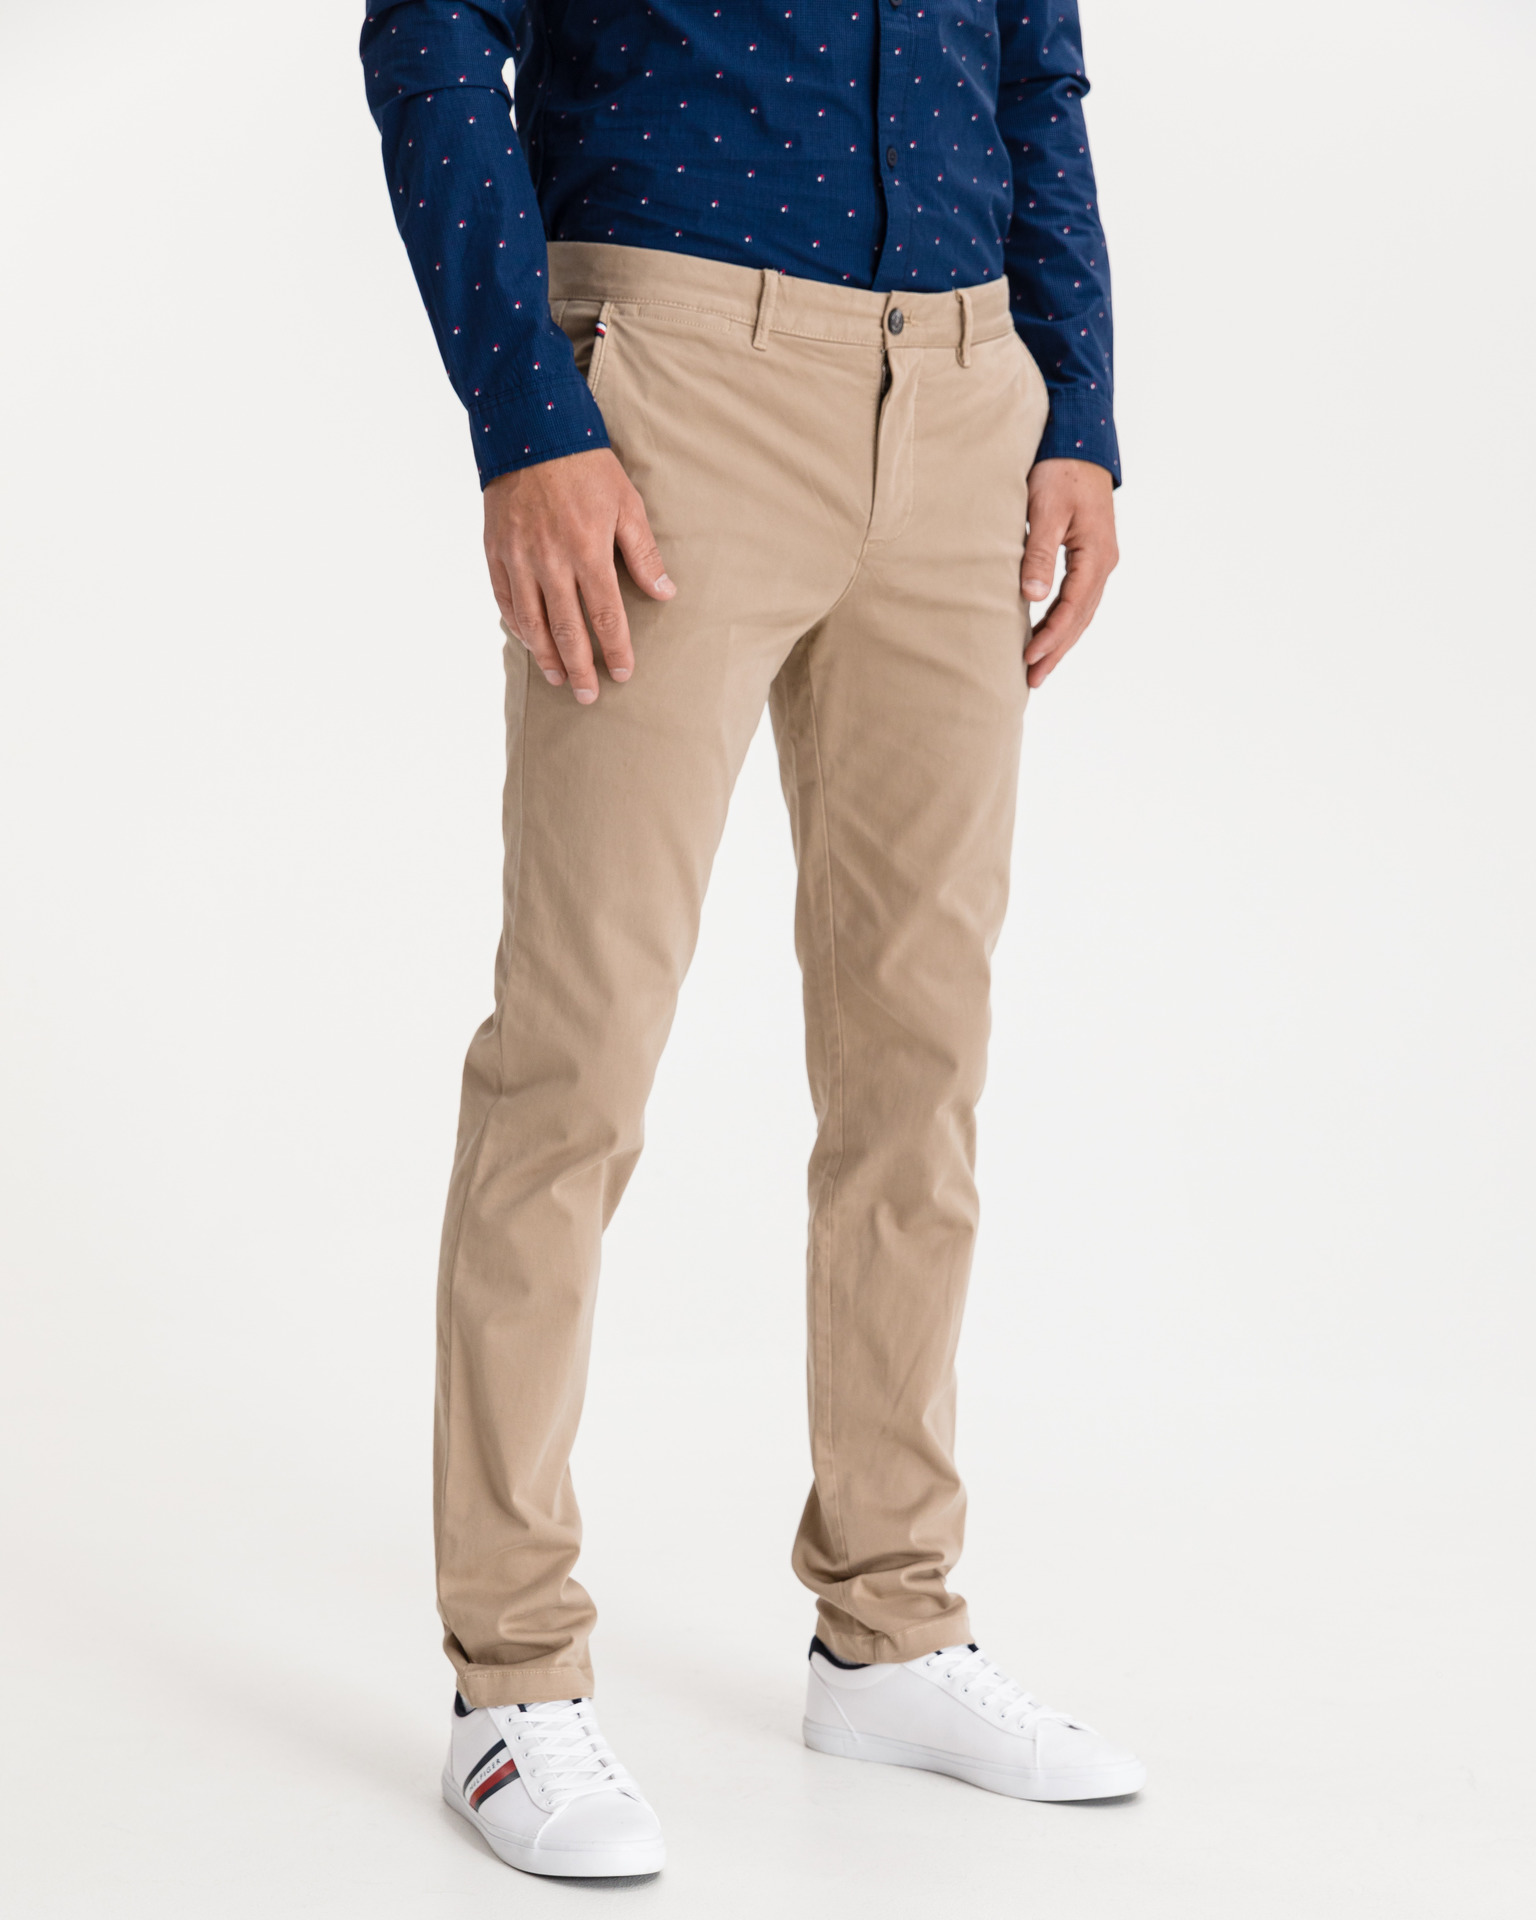 nationalism Complex copy Tommy Hilfiger - Bleecker Chino Trousers Bibloo.com